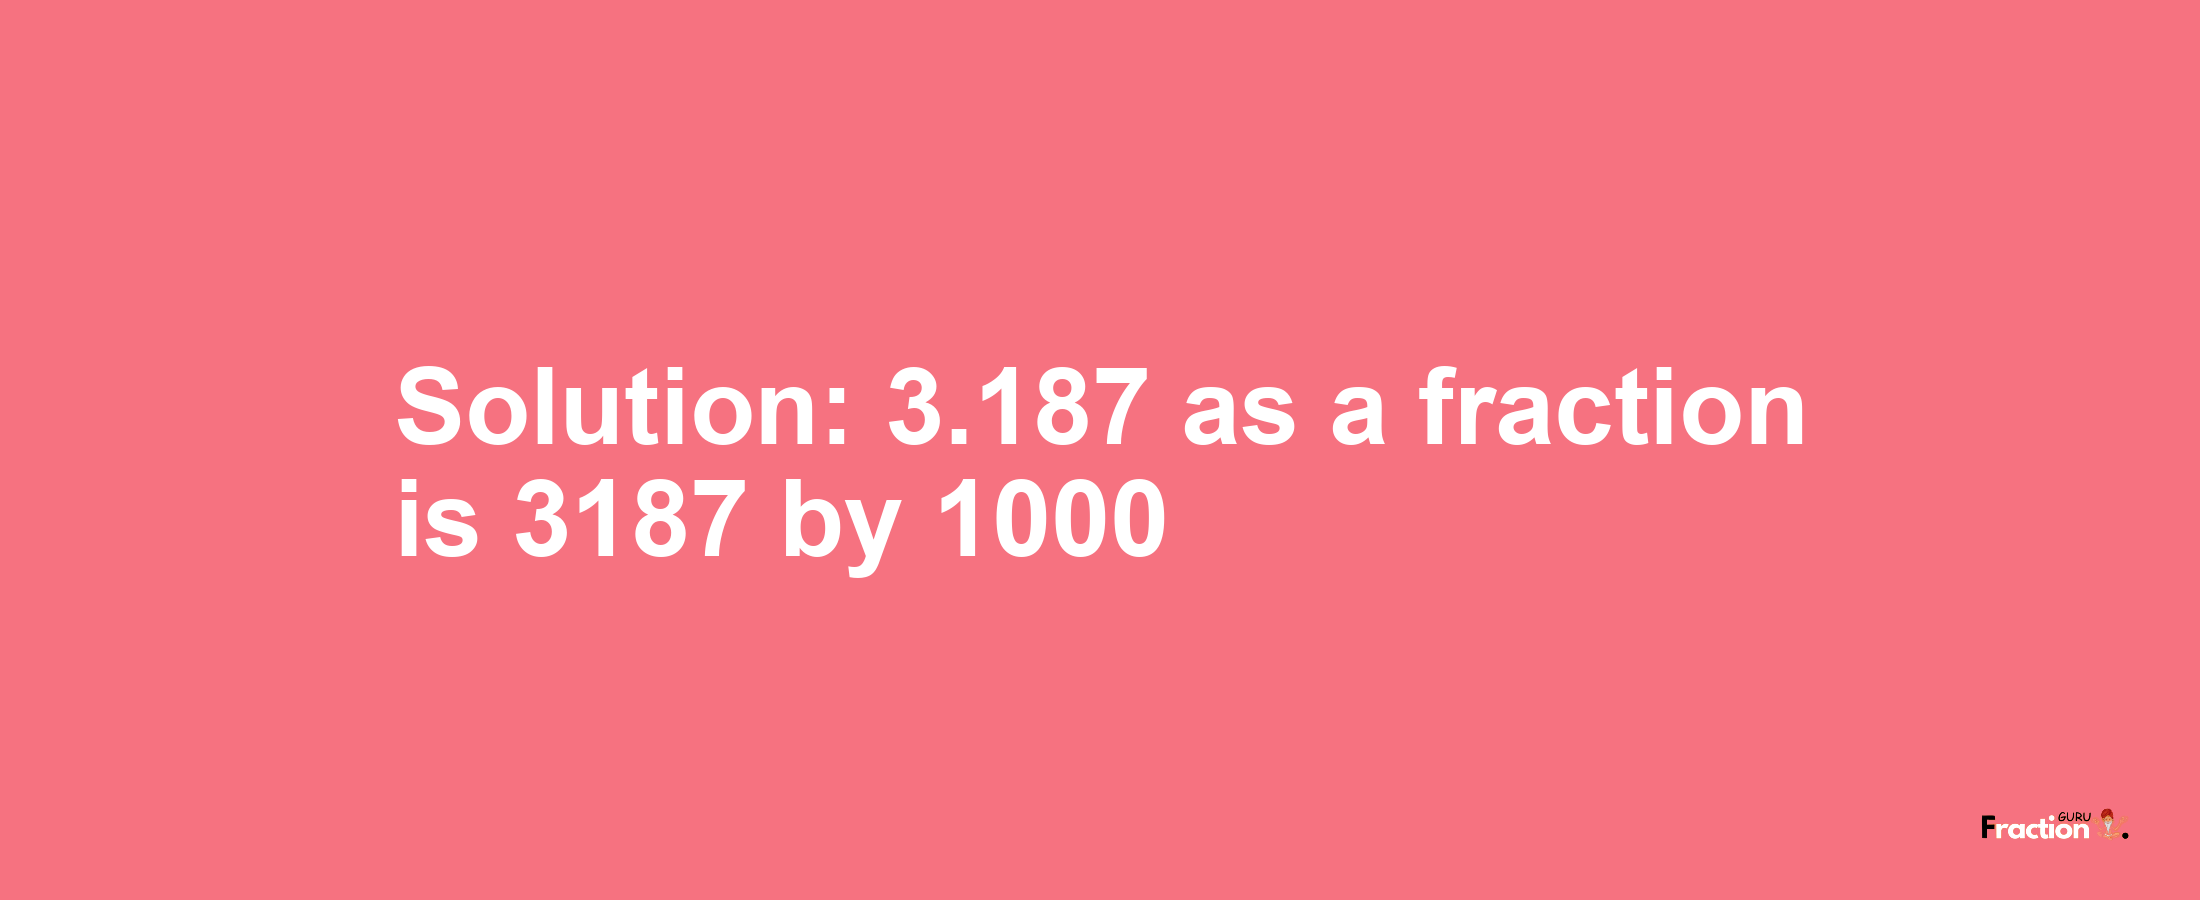 Solution:3.187 as a fraction is 3187/1000